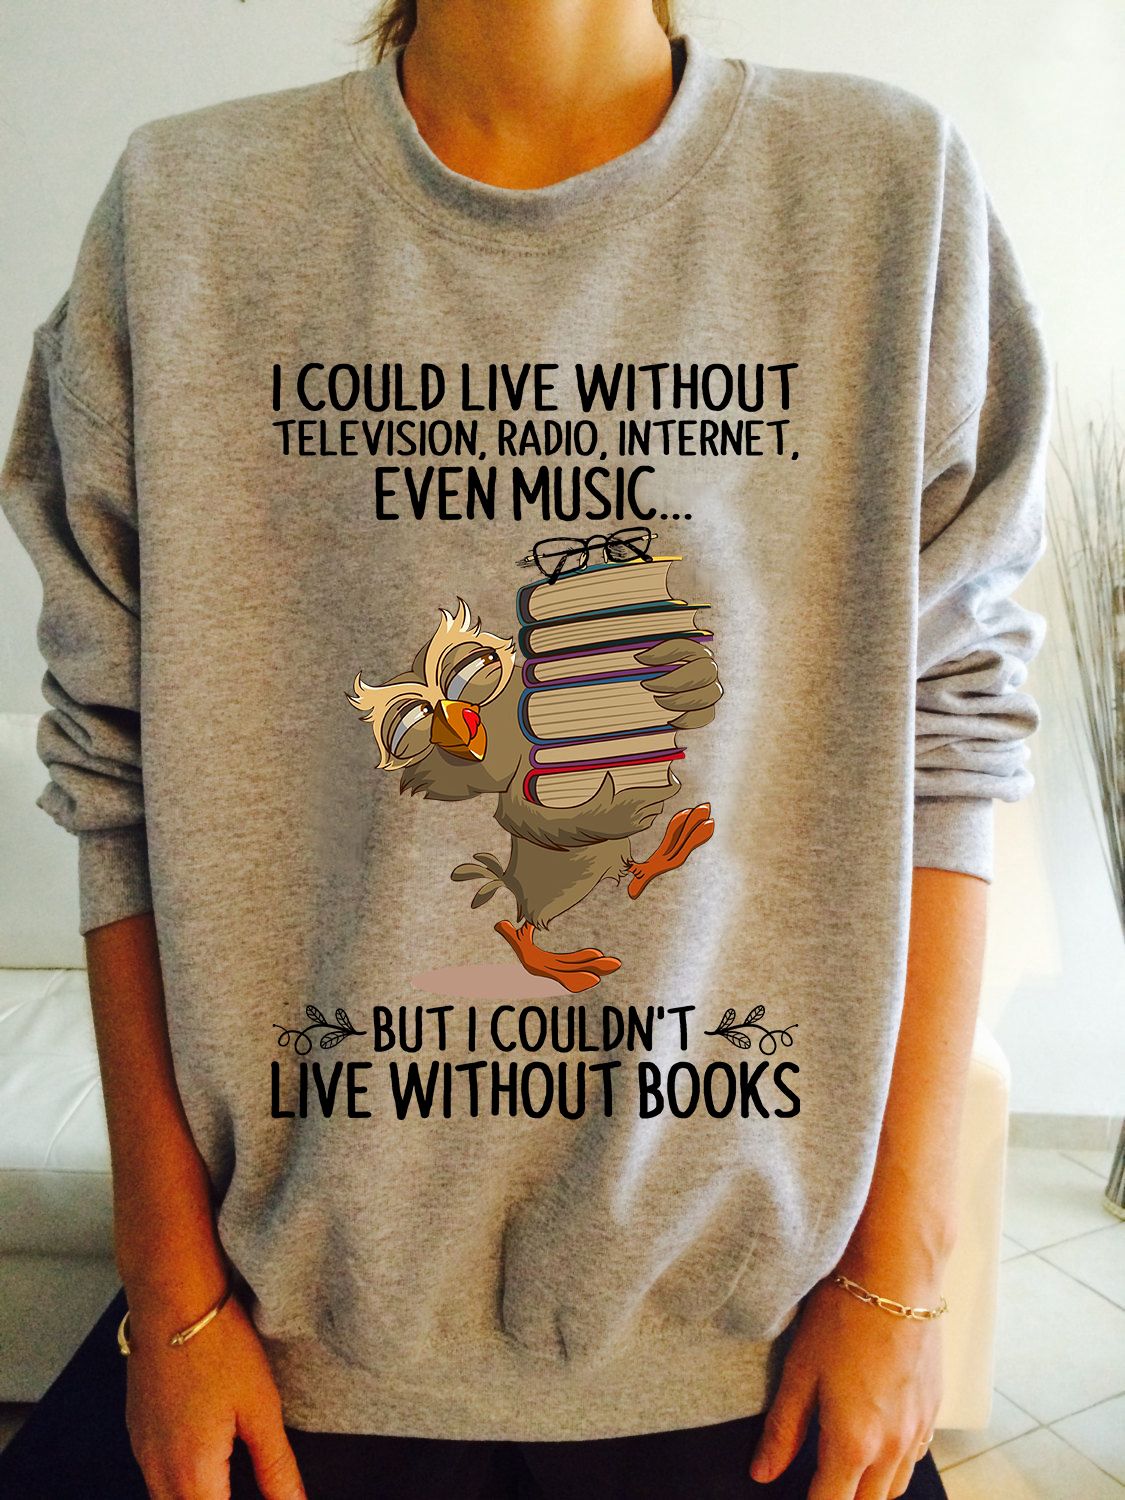 I could live without television, radio, internet but I couldn't live without books - Owl and book